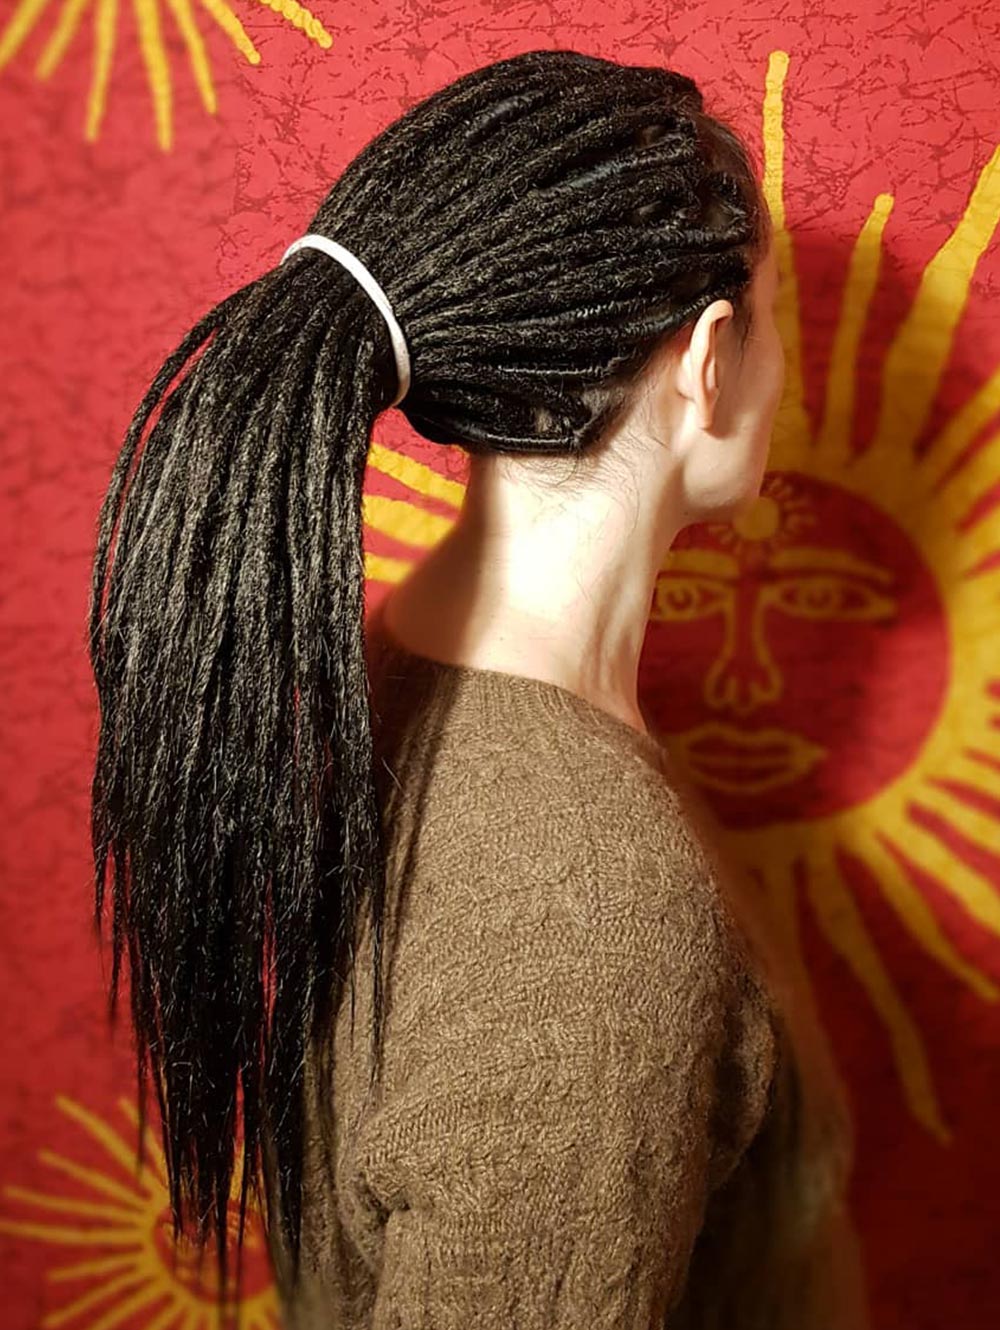 Wholesale only---18" Double Ended Handmade Dreadlock Extensions